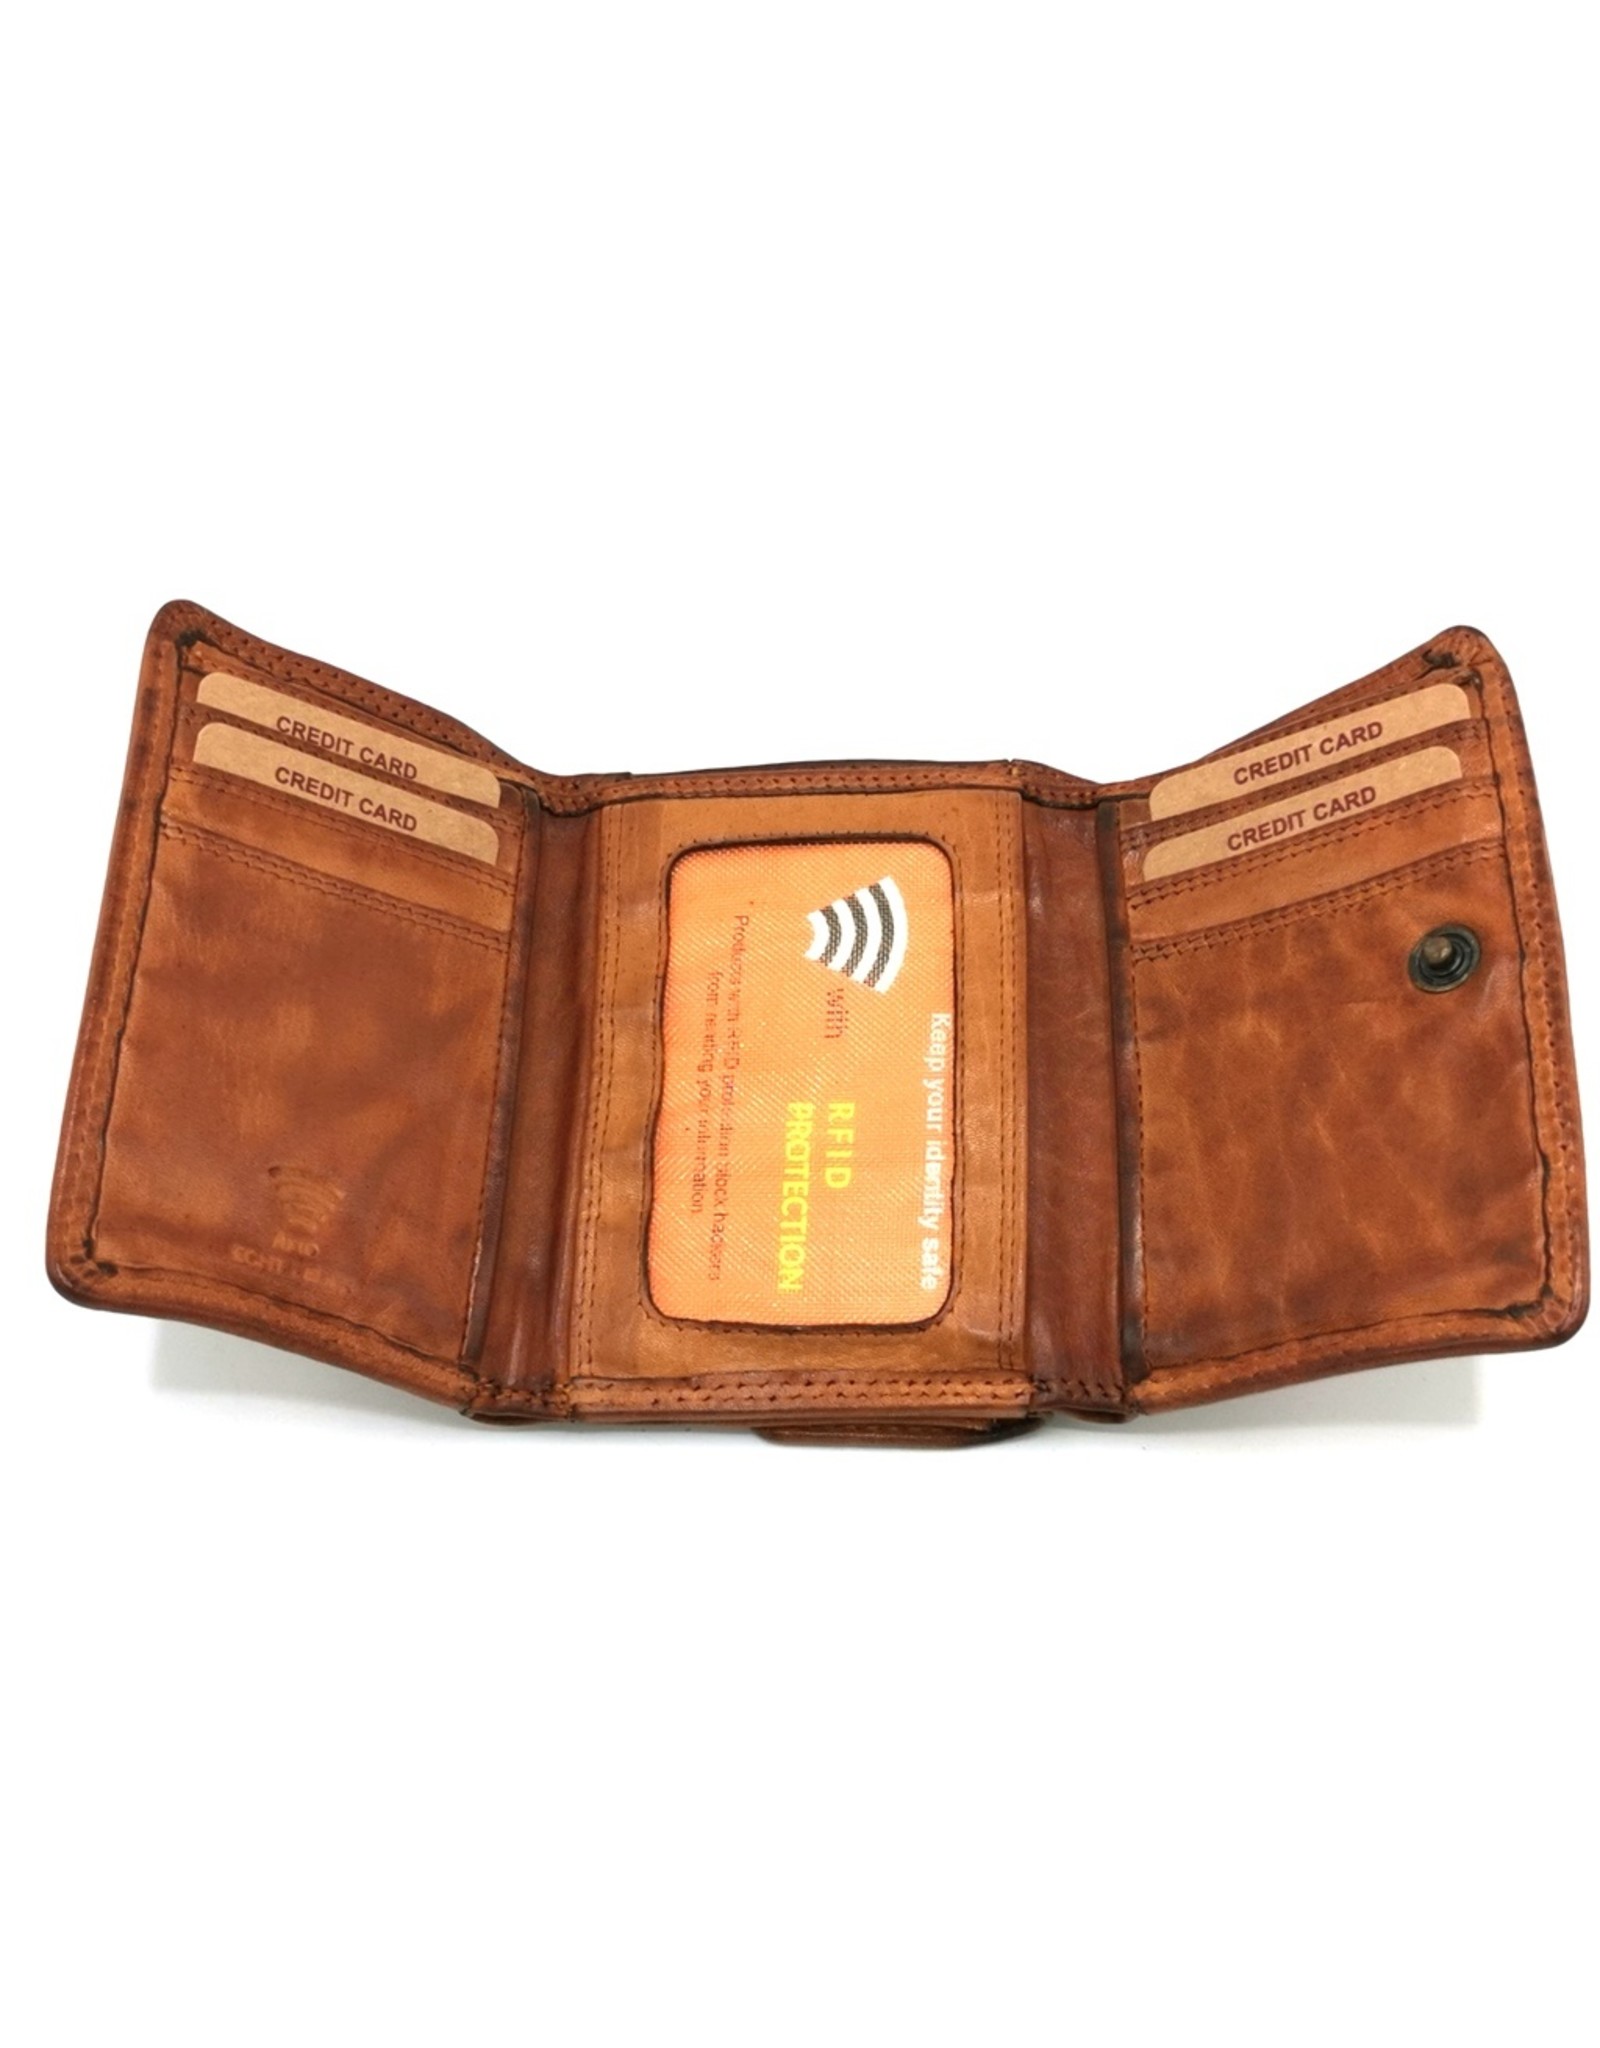 HillBurry Leather Wallets - Hillburry Wallet Washed Leather Medium